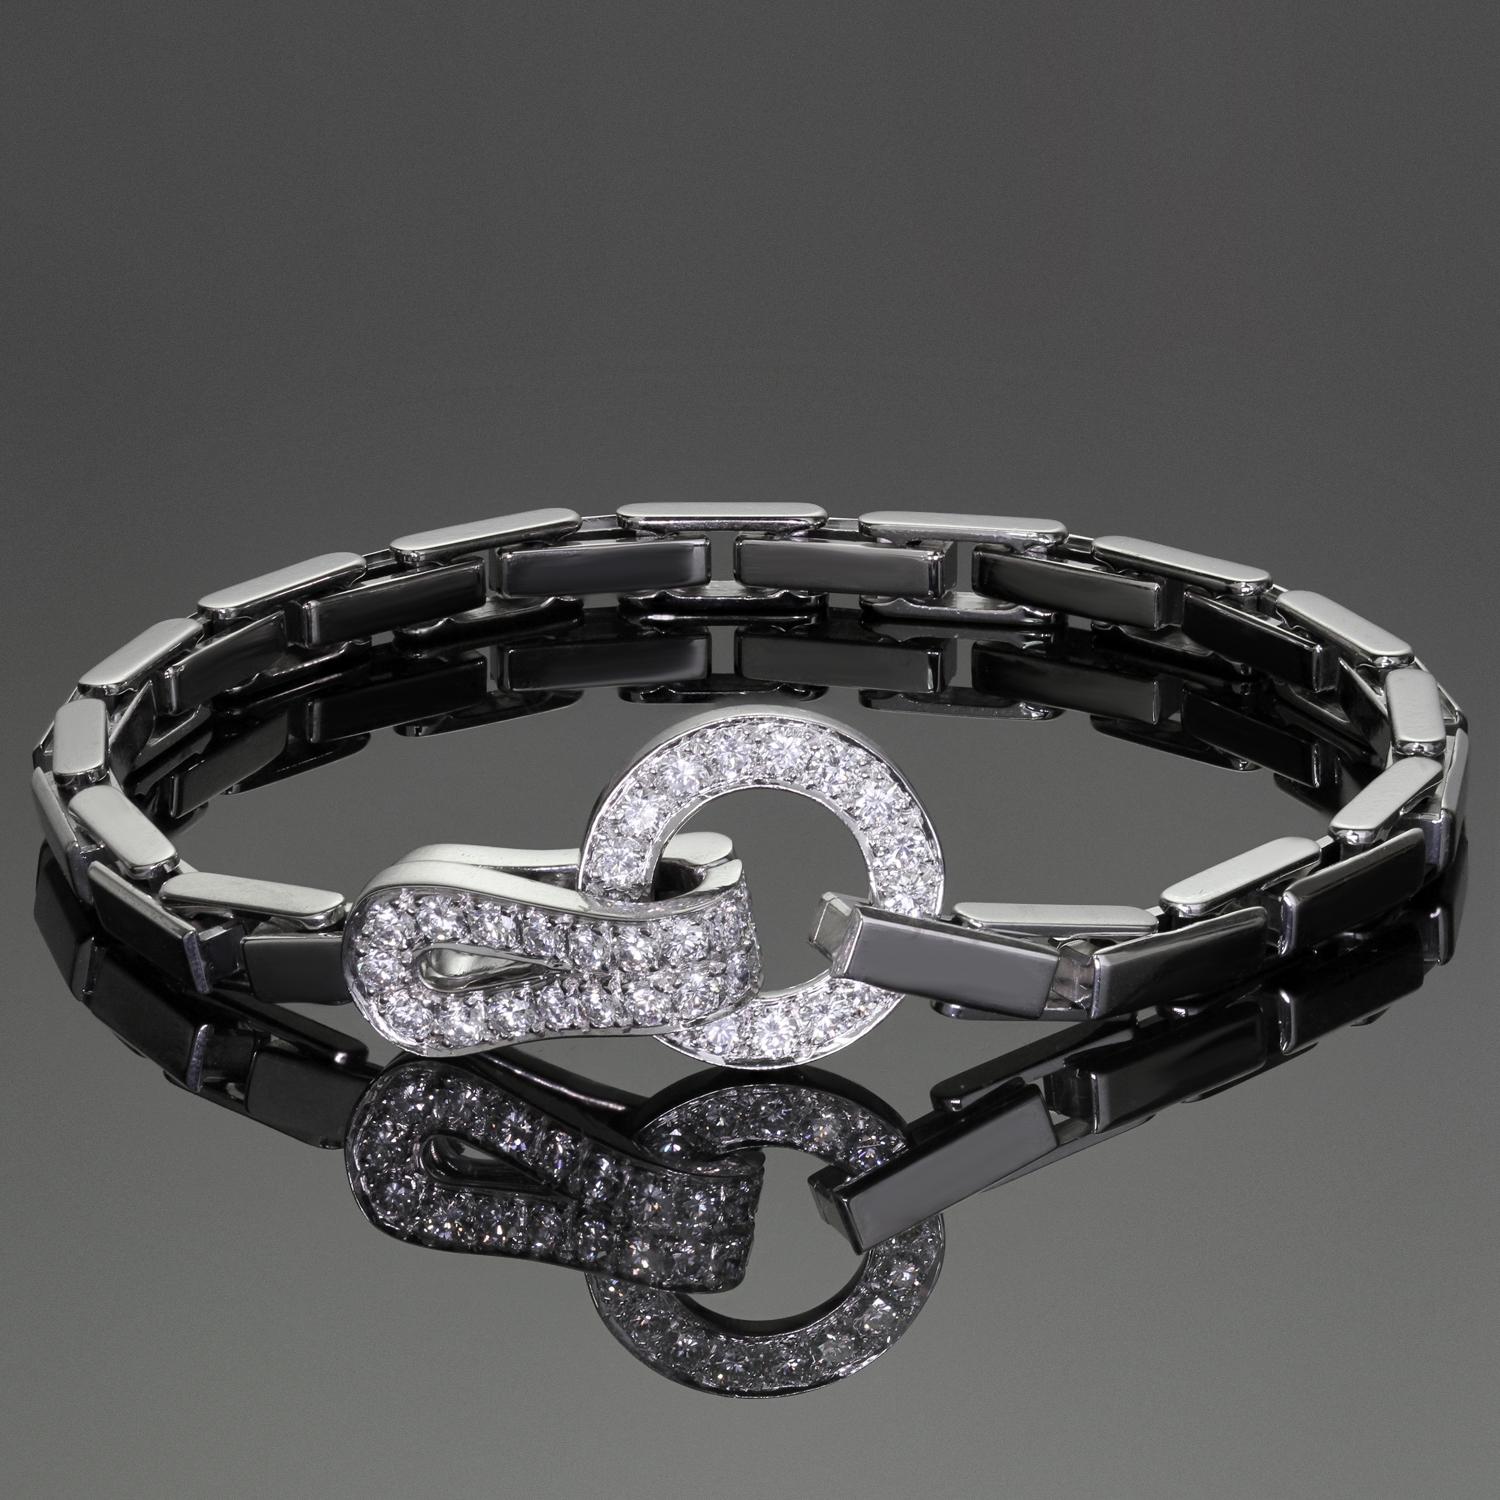 This fabulous Cartier bracelet is crafted of 18k white gold and set with round brilliant-cut D-E-F VVS1-VVS2 diamonds weighing an estimated 1.15 - 1.20 carats. Cartier's Agrafe collection is inspired by Haute Couture fashion with its central element